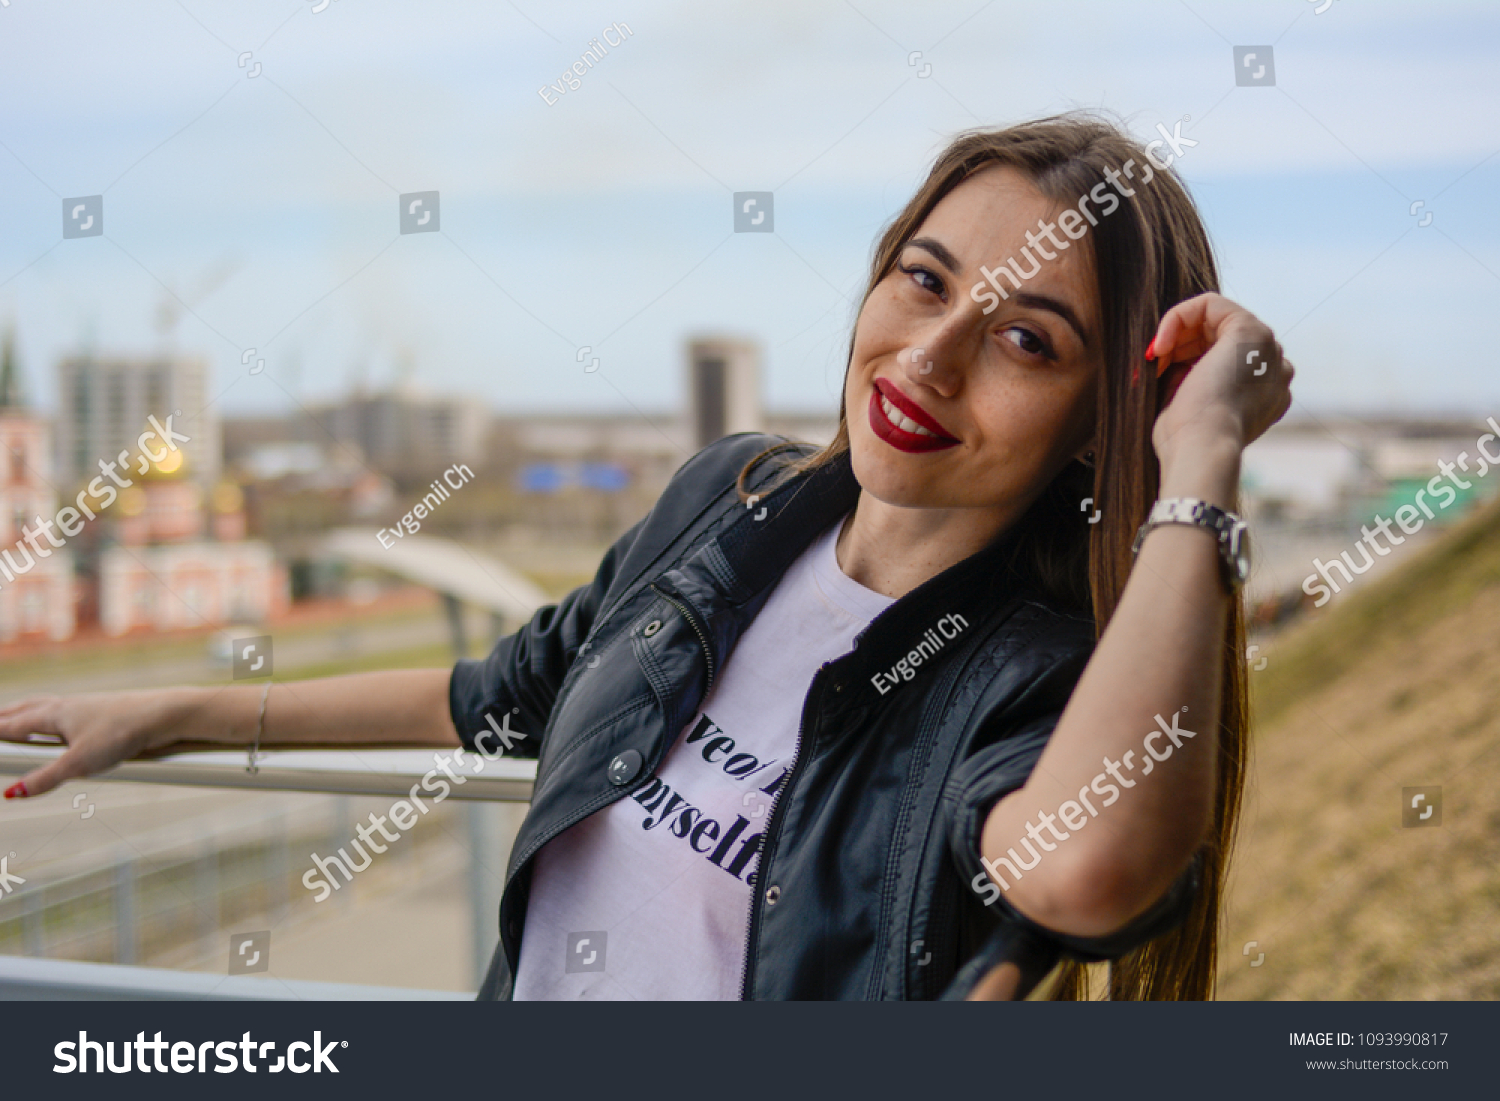 Fashionable beautiful woman in a black jacket on a summer day against the background of the city #1093990817